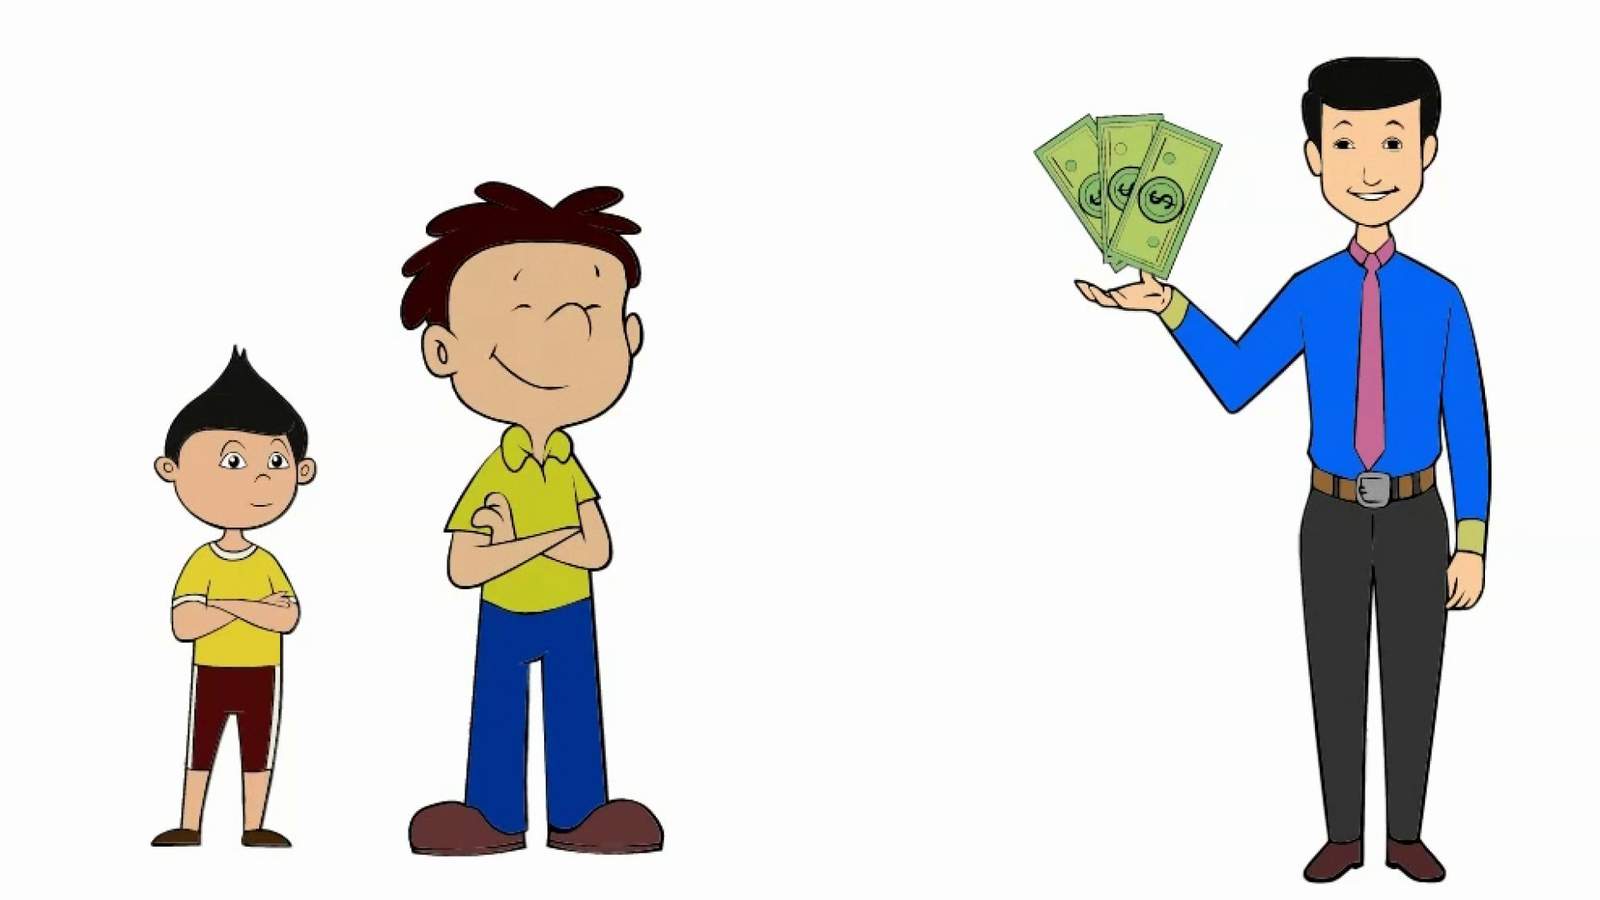 Want to teach your kids about earning money? Here are some tips to help you get started.